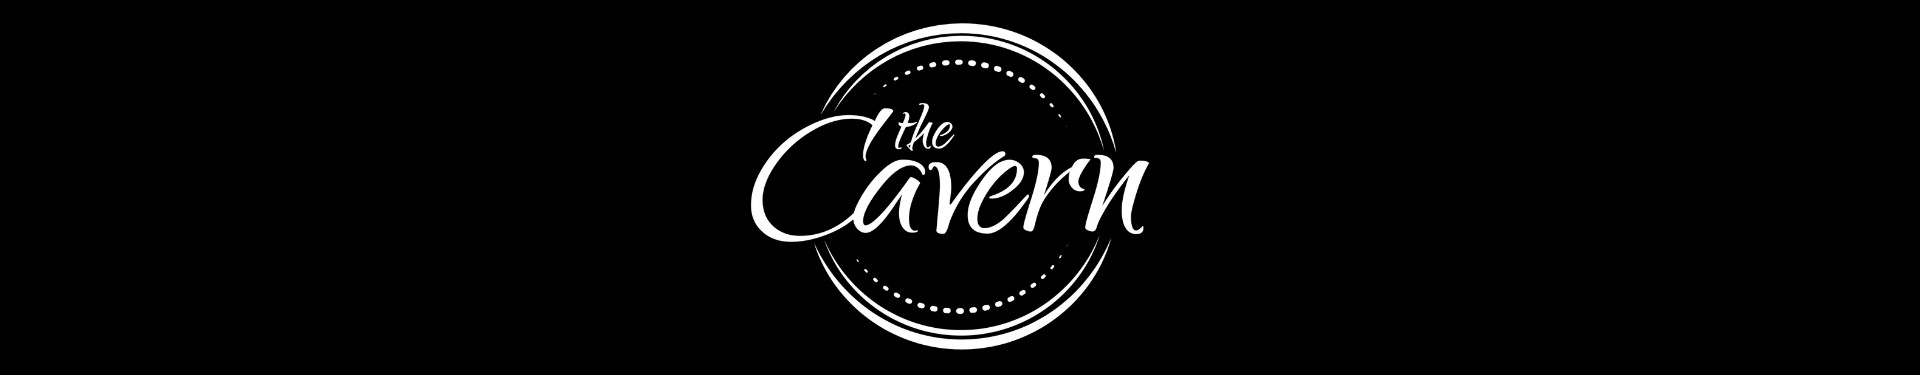 banner for the Cavern